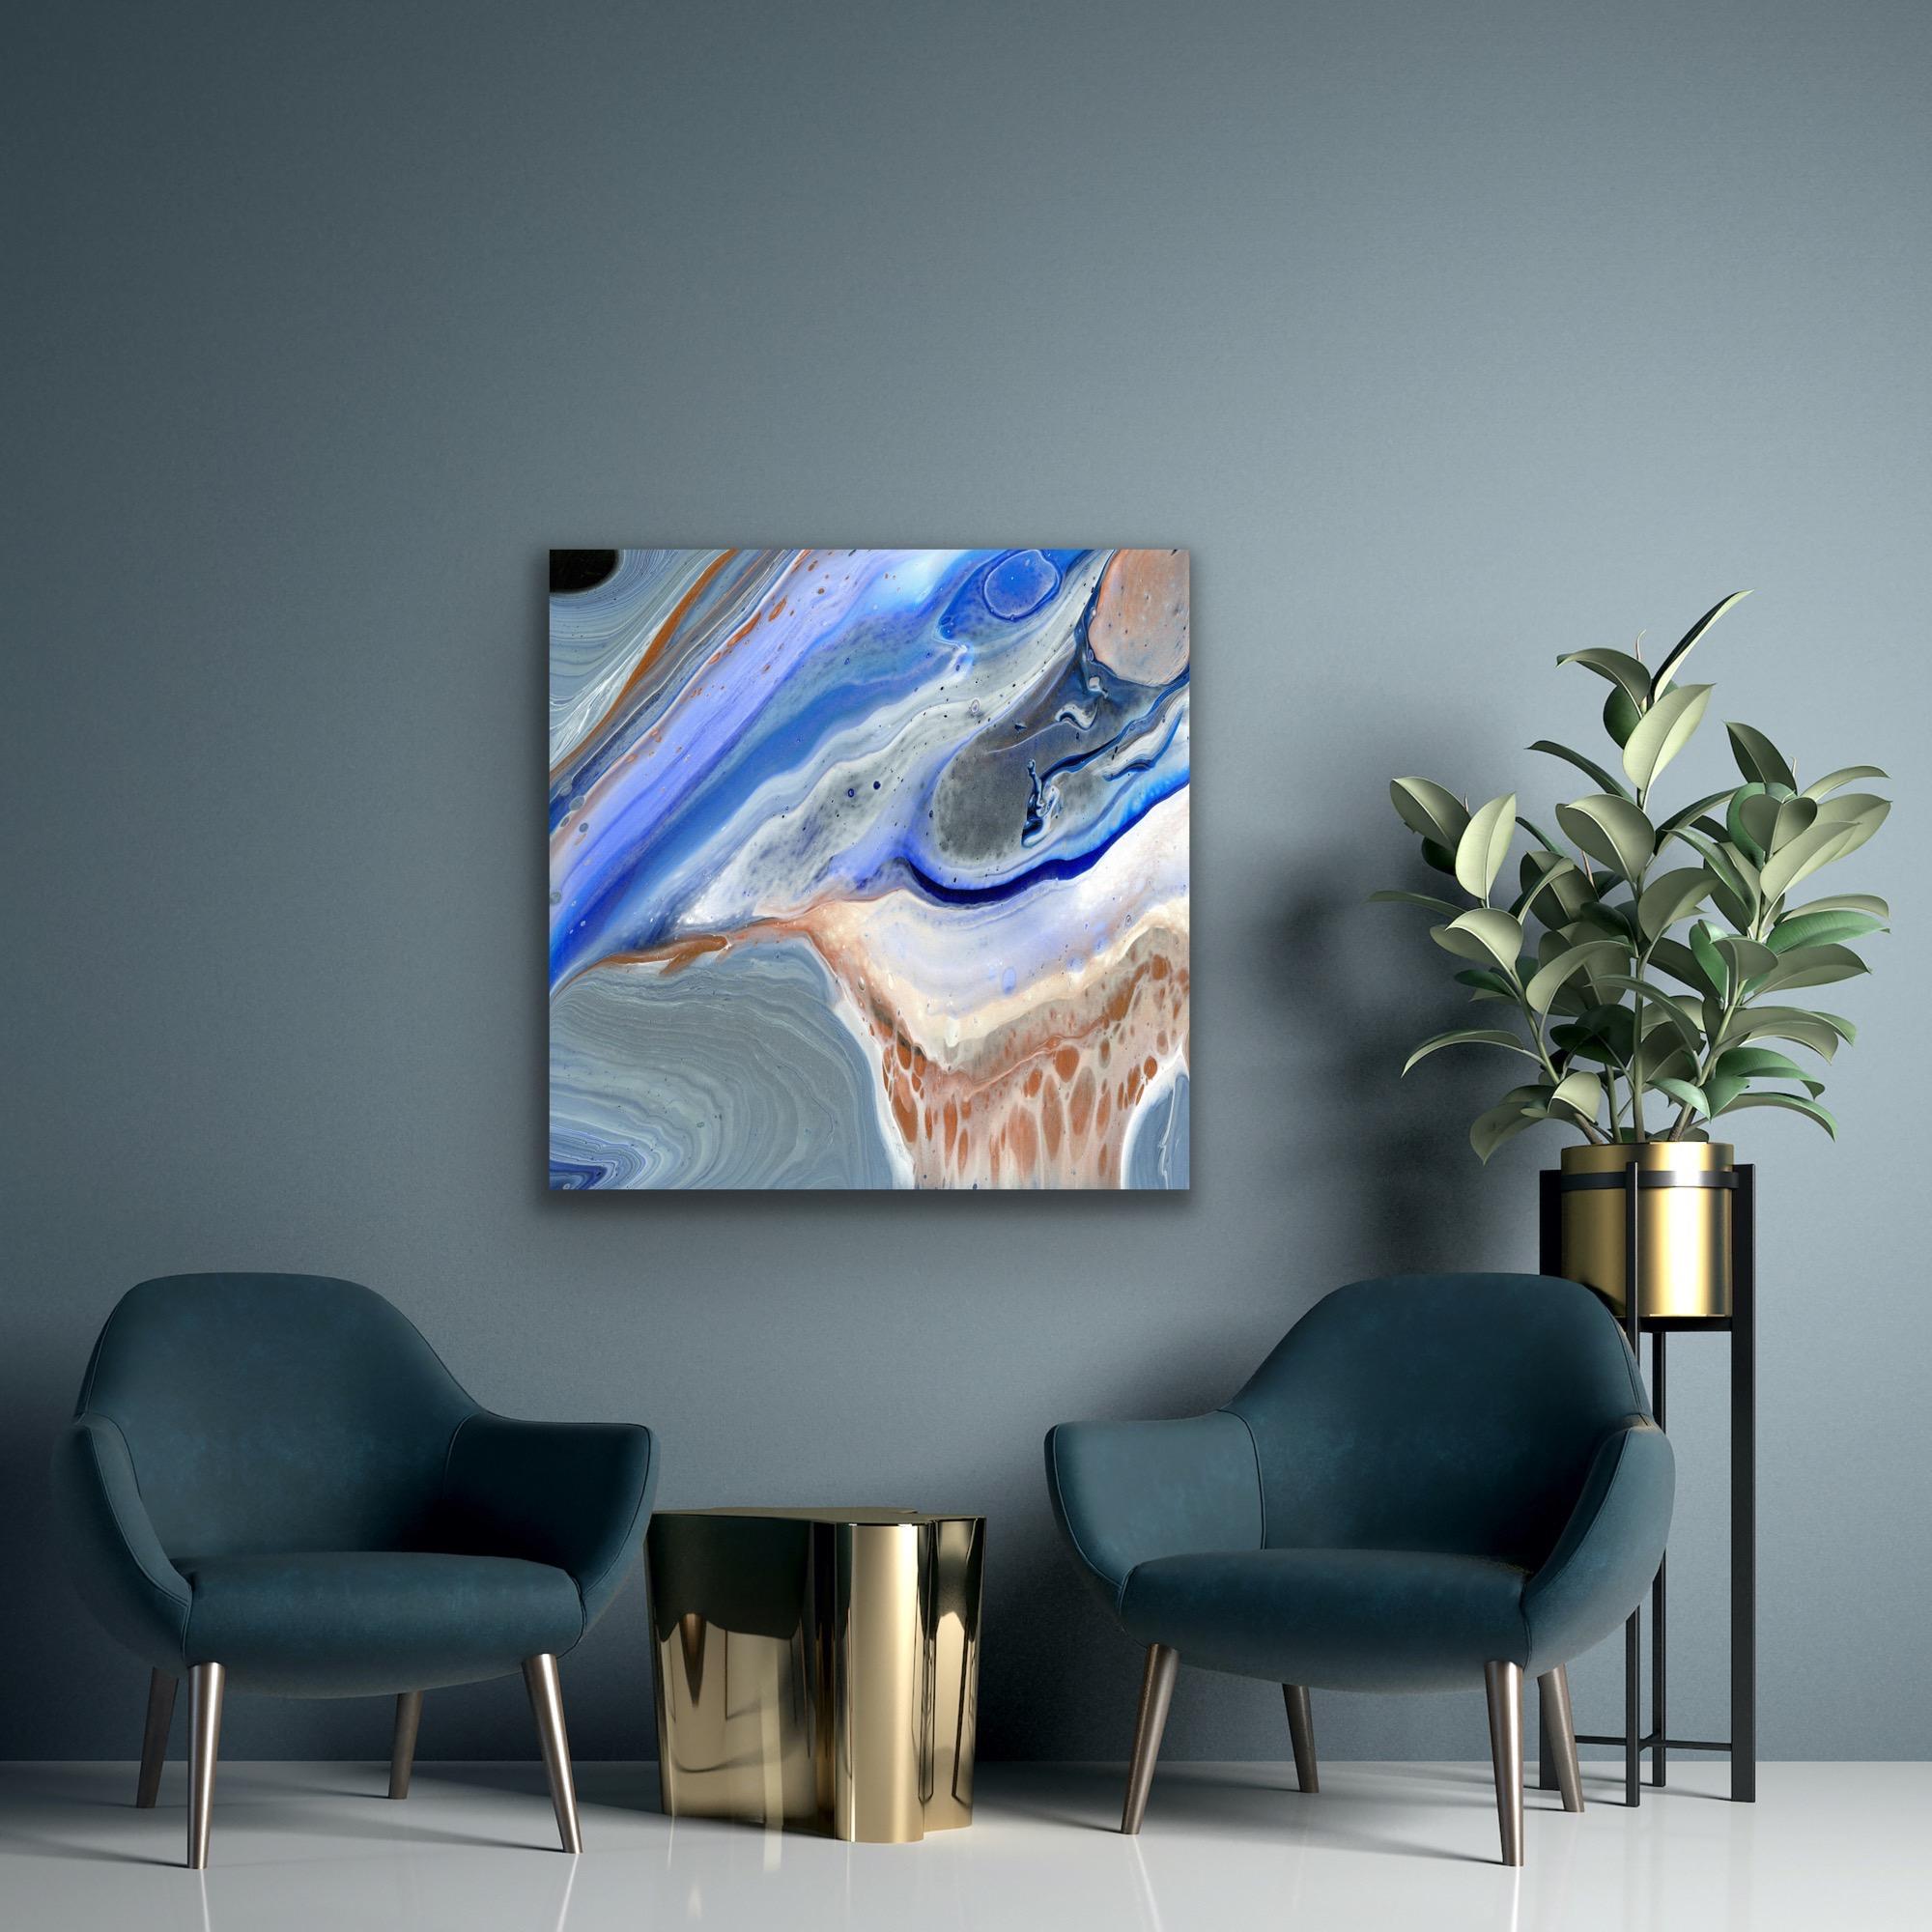 Modern Wall Art, Geode Inspired Giclee Print, Limited Edition Signed by Artist For Sale 3